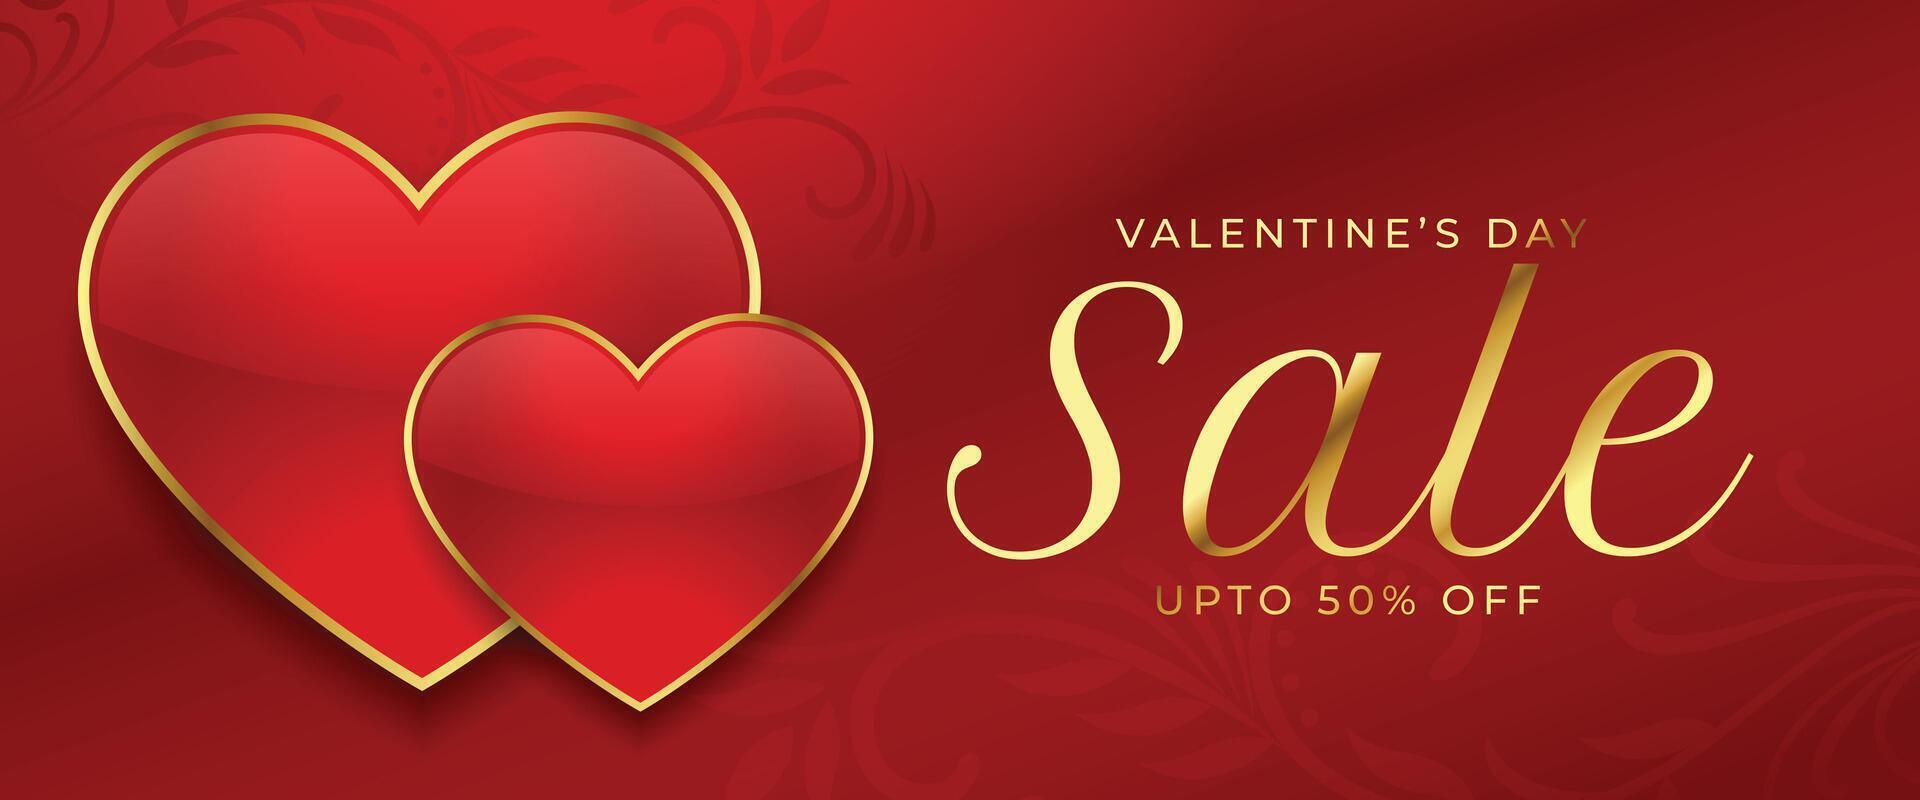 lovely valentines day sale and offer banner with cute hearts vector